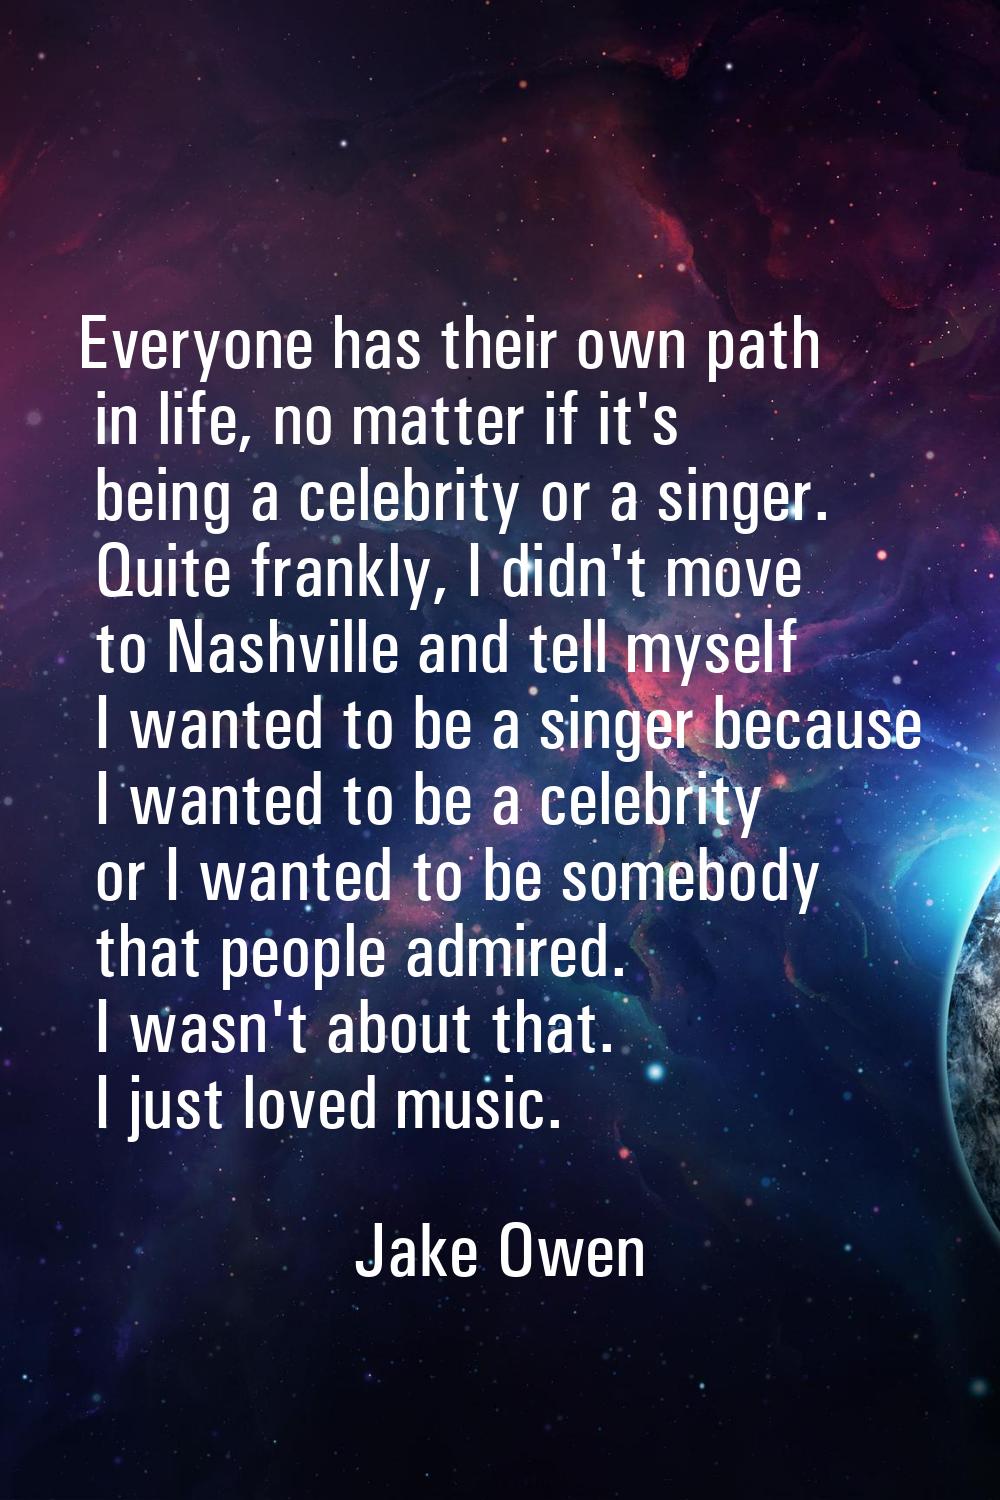 Everyone has their own path in life, no matter if it's being a celebrity or a singer. Quite frankly